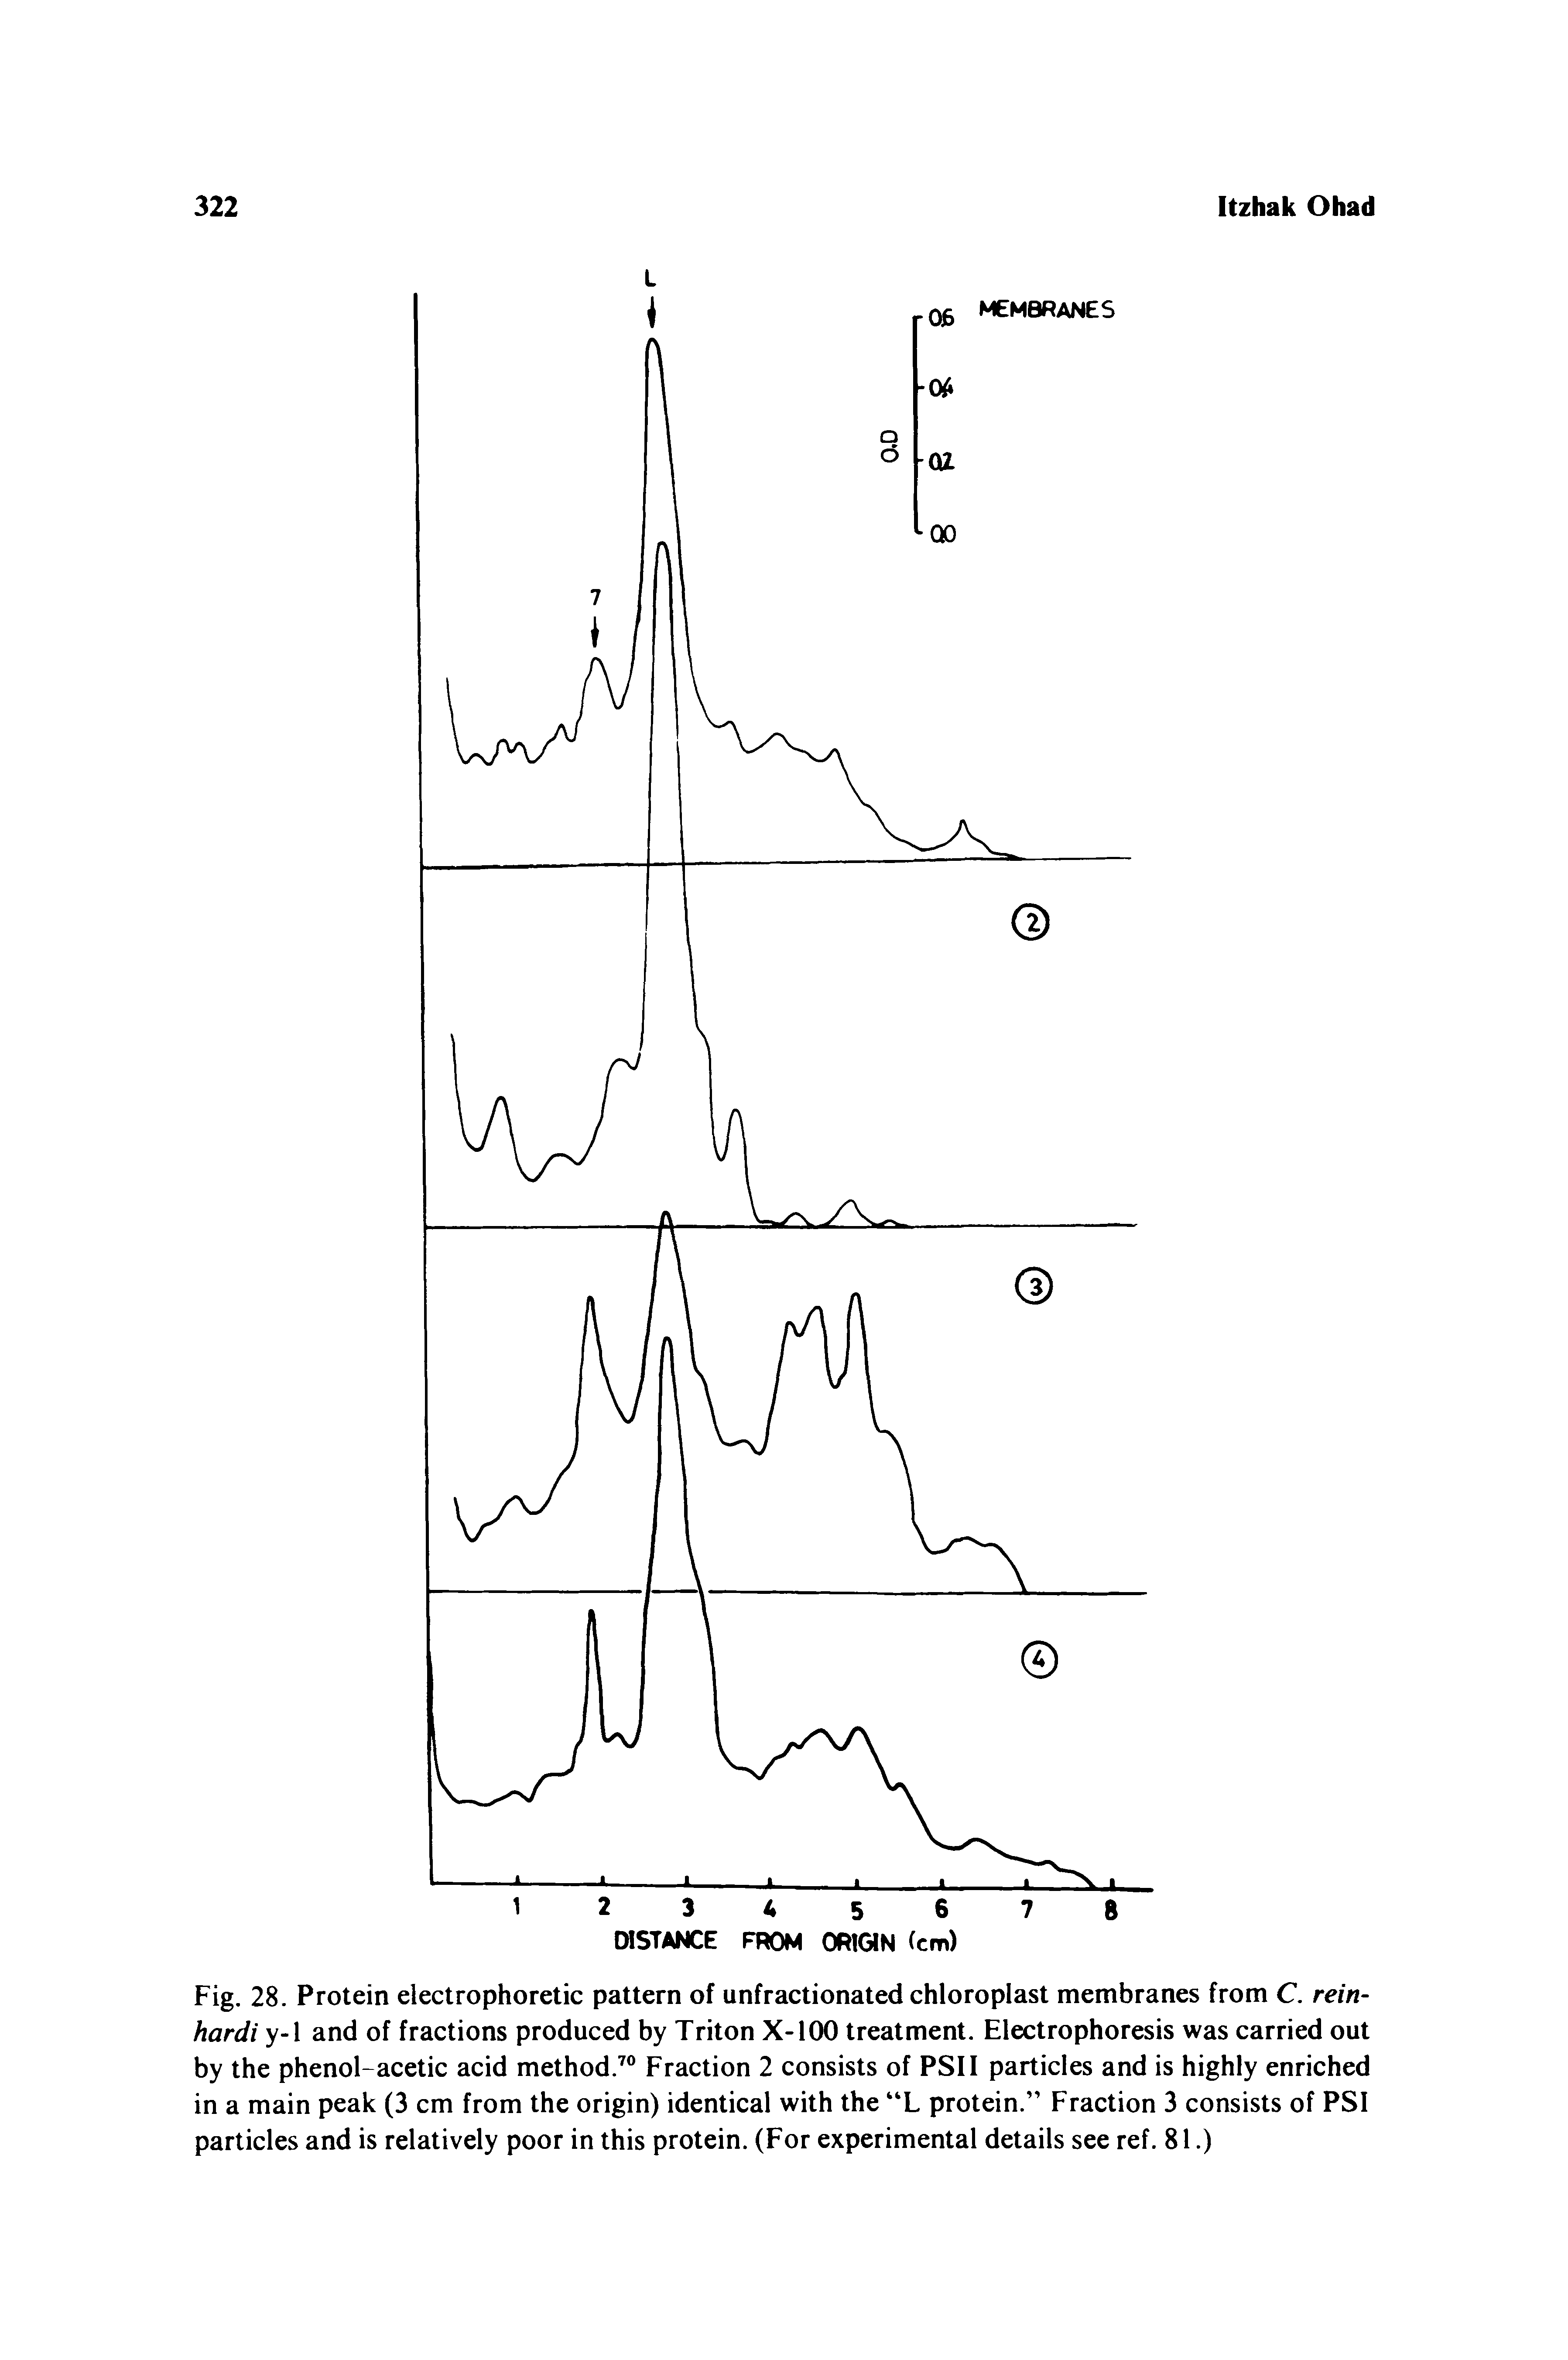 Fig. 28. Protein electrophoretic pattern of unfractionated chloroplast membranes from C. rein-hardi y-1 and of fractions produced by Triton X-lOO treatment. Electrophoresis was carried out by the phenol-acetic acid method." Fraction 2 consists of PSII particles and is highly enriched in a main peak (3 cm from the origin) identical with the L protein. Fraction 3 consists of PSI particles and is relatively poor in this protein. (For experimental details see ref. 81.)...